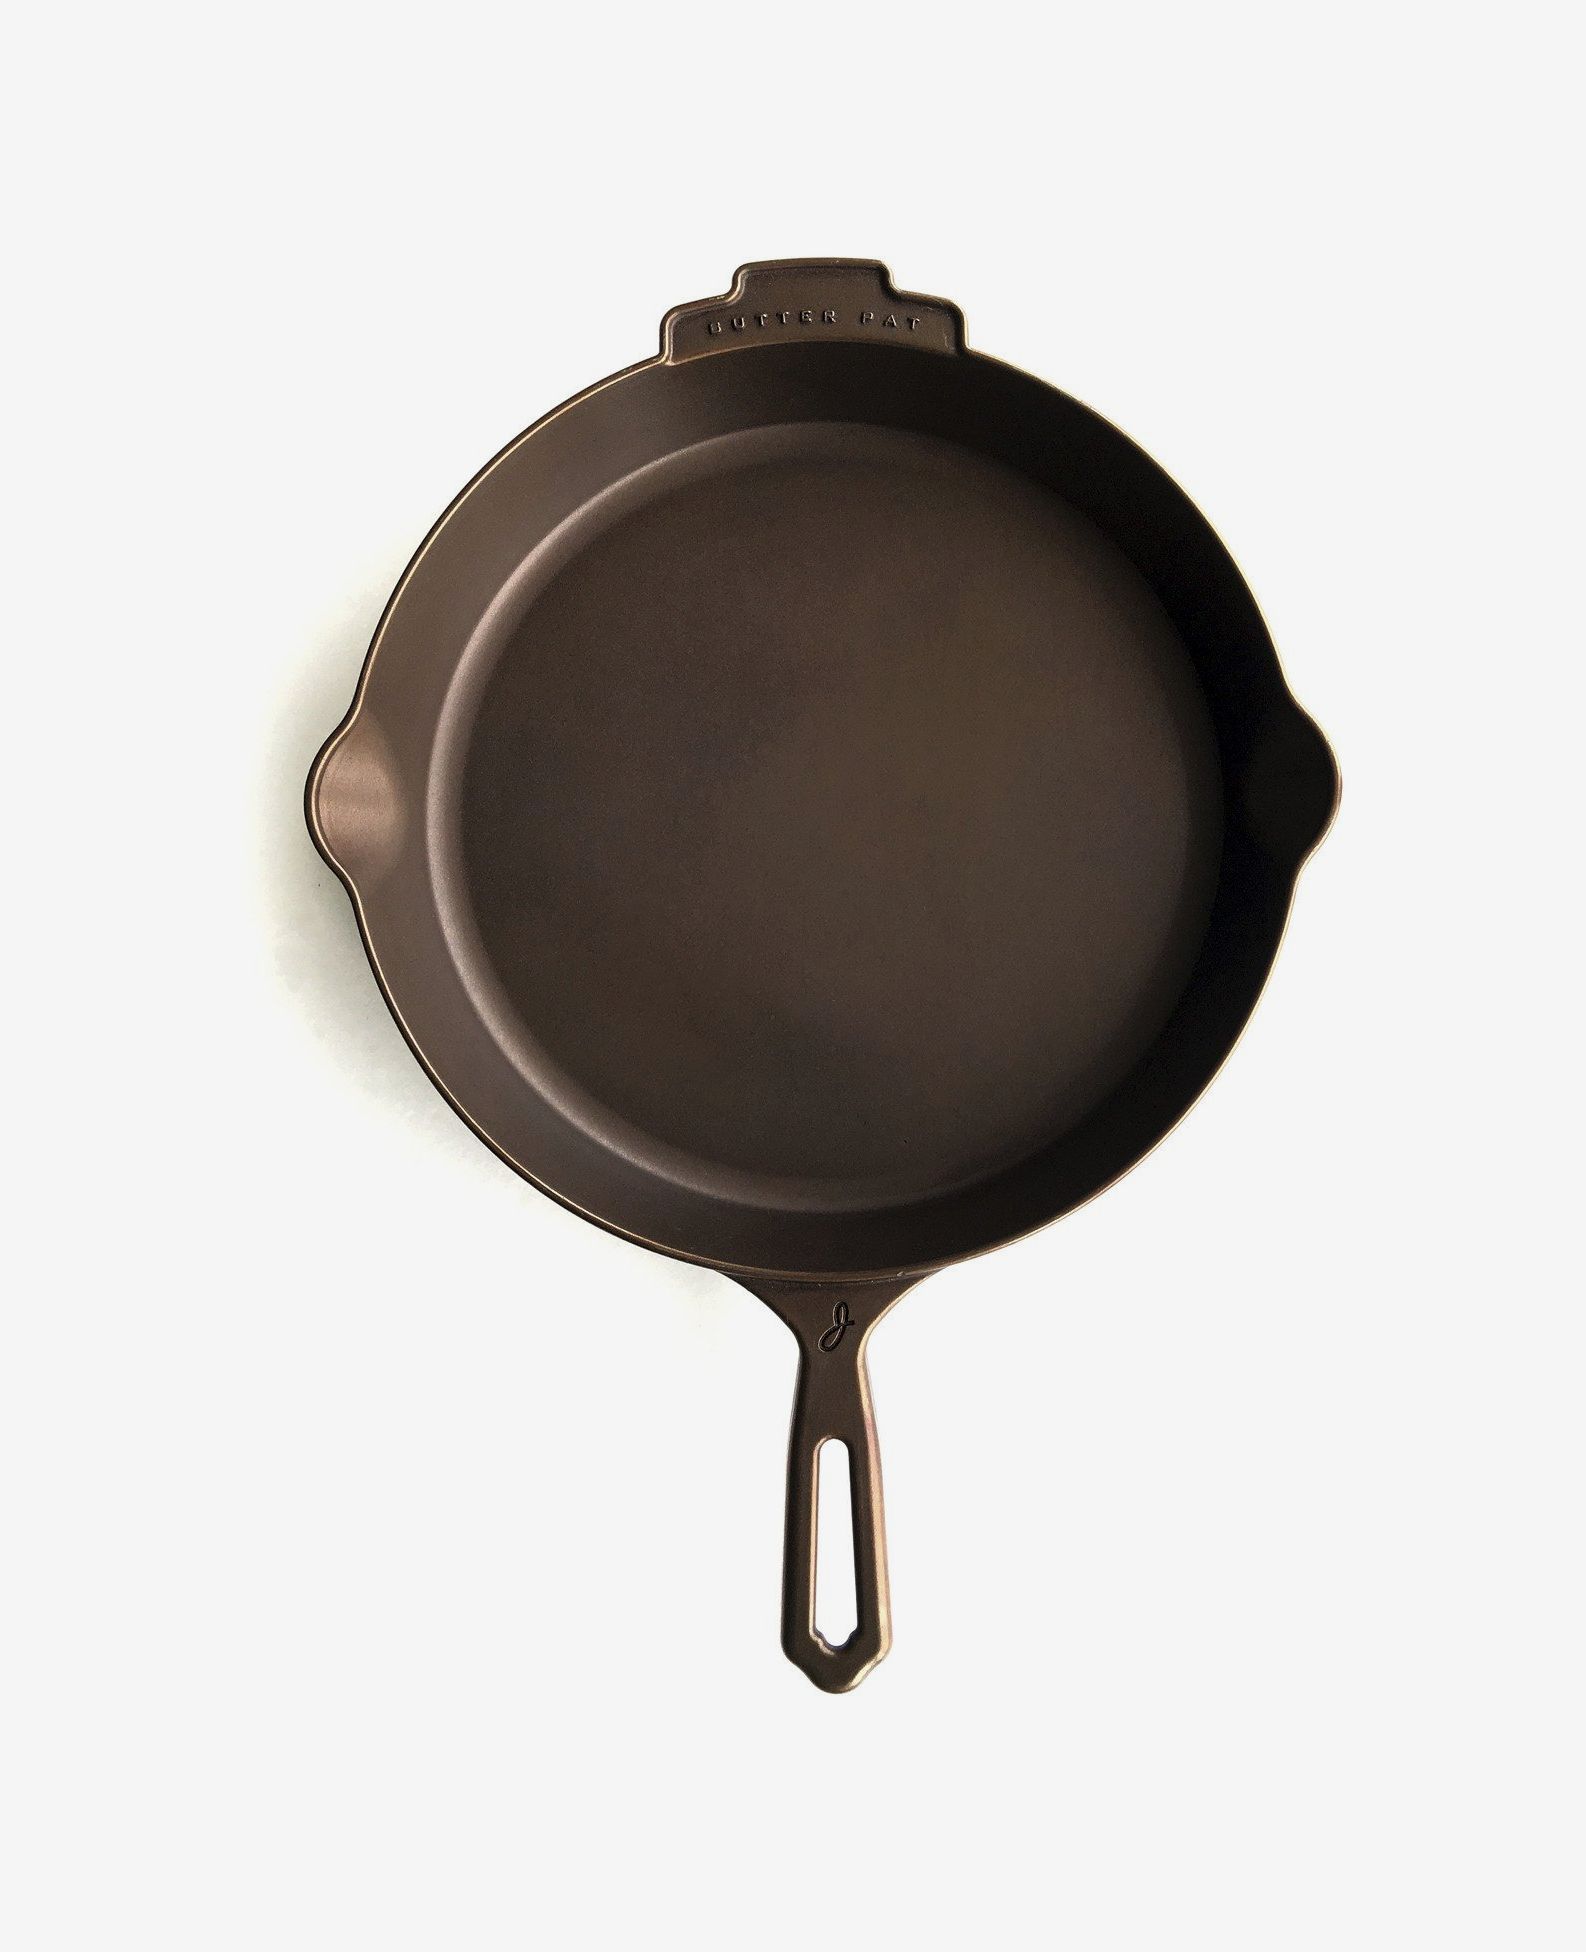 Five essential pans to use for baking and so much more - The Washington Post